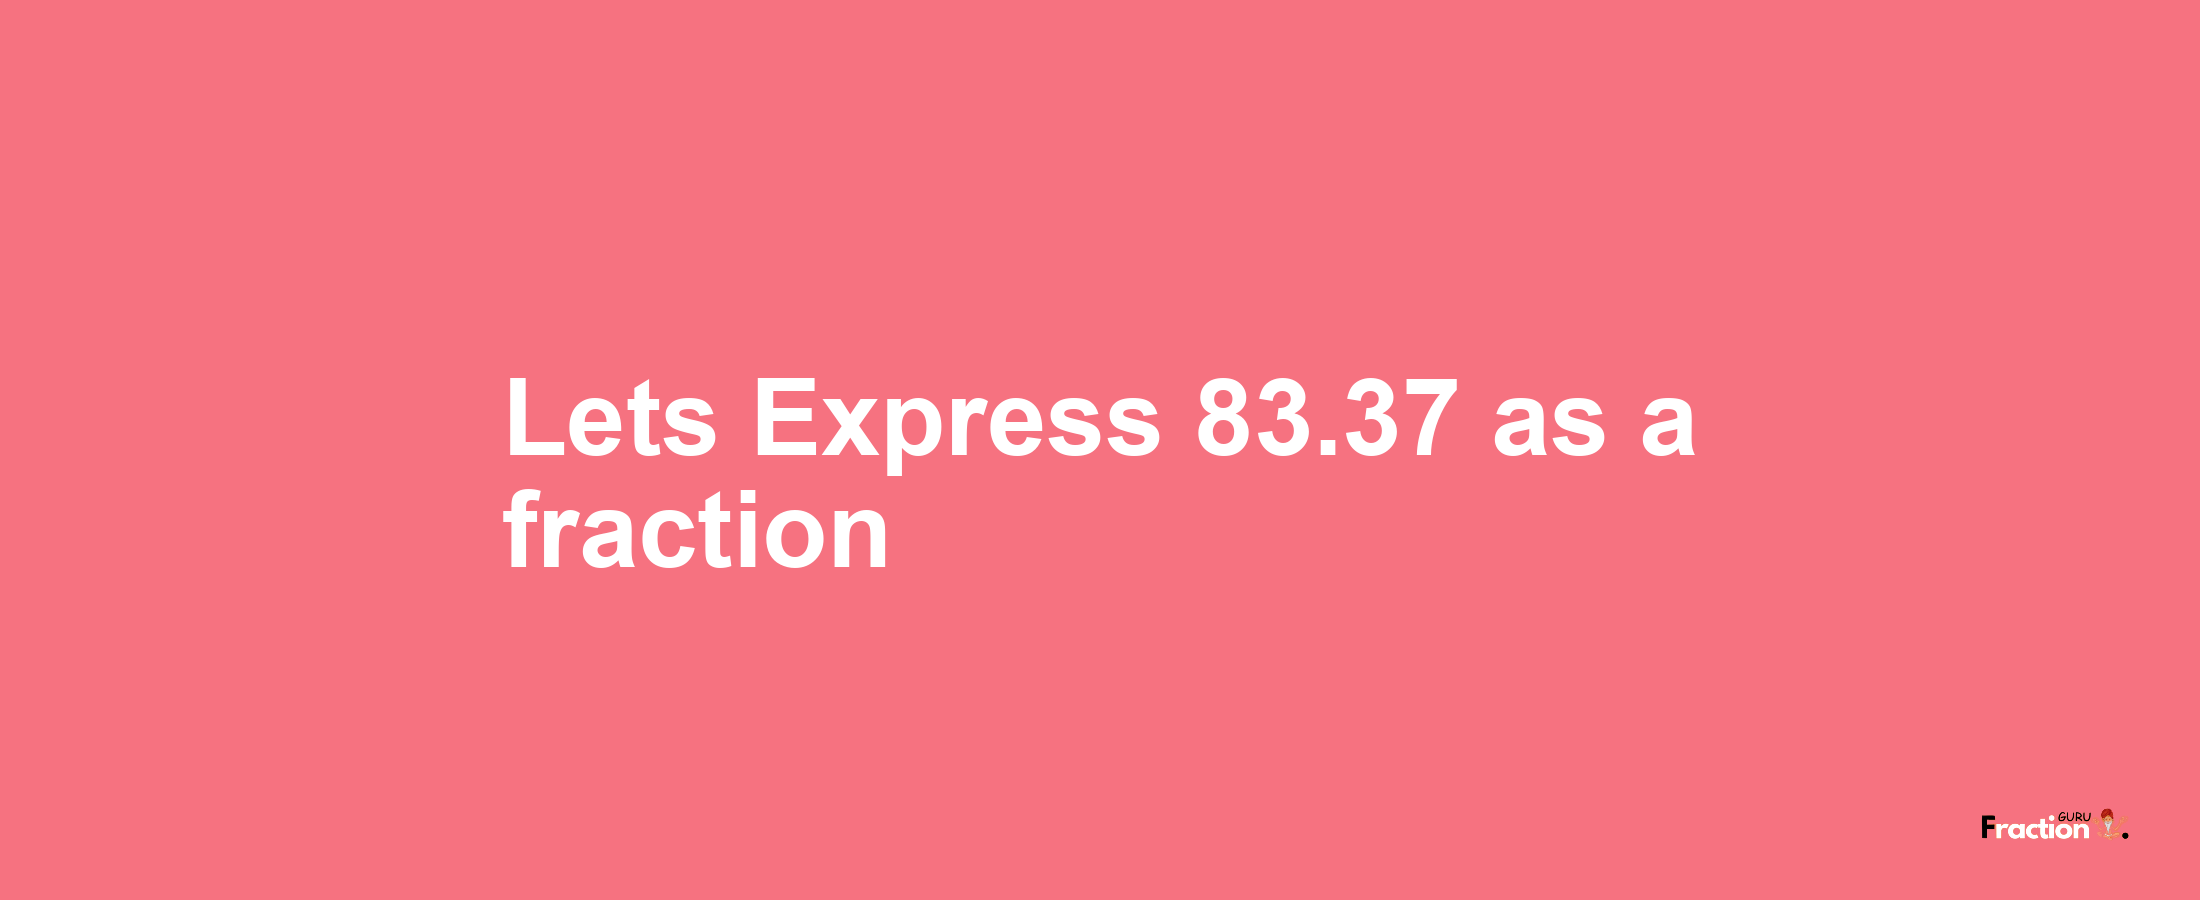 Lets Express 83.37 as afraction